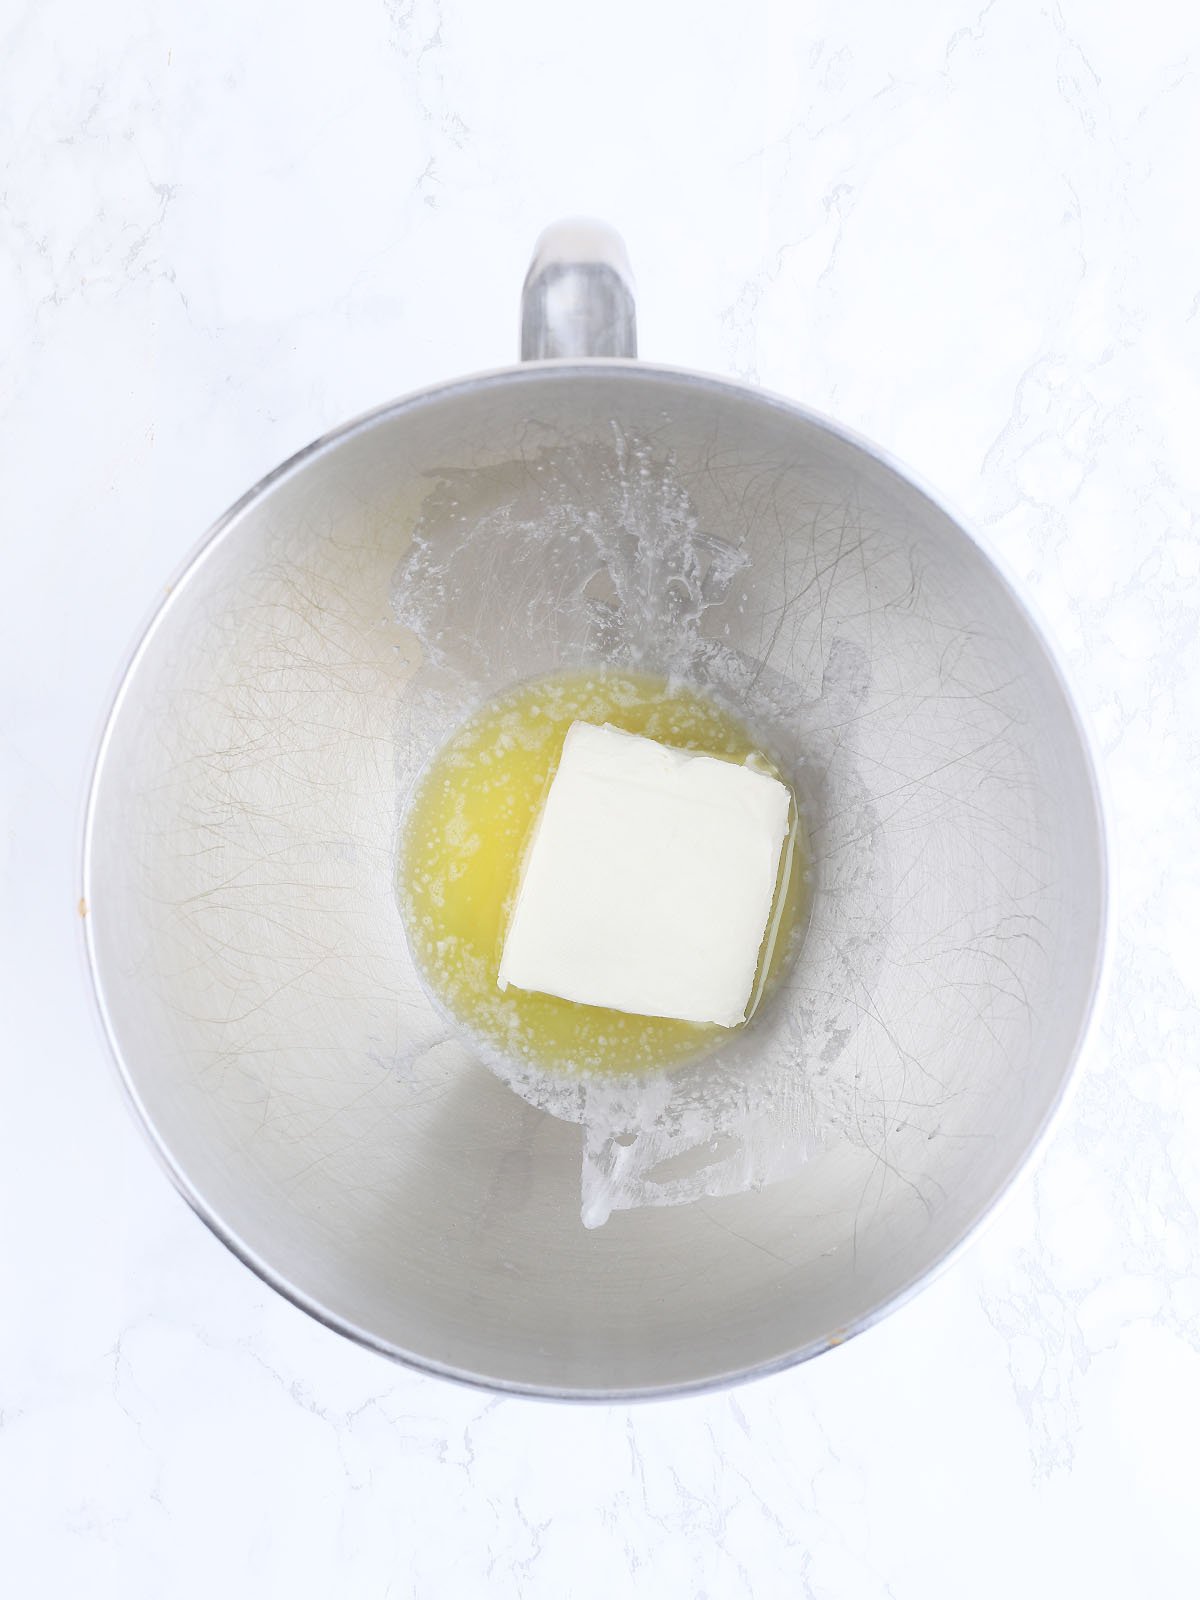 melted butter and cream cheese in a metal mixing bowl